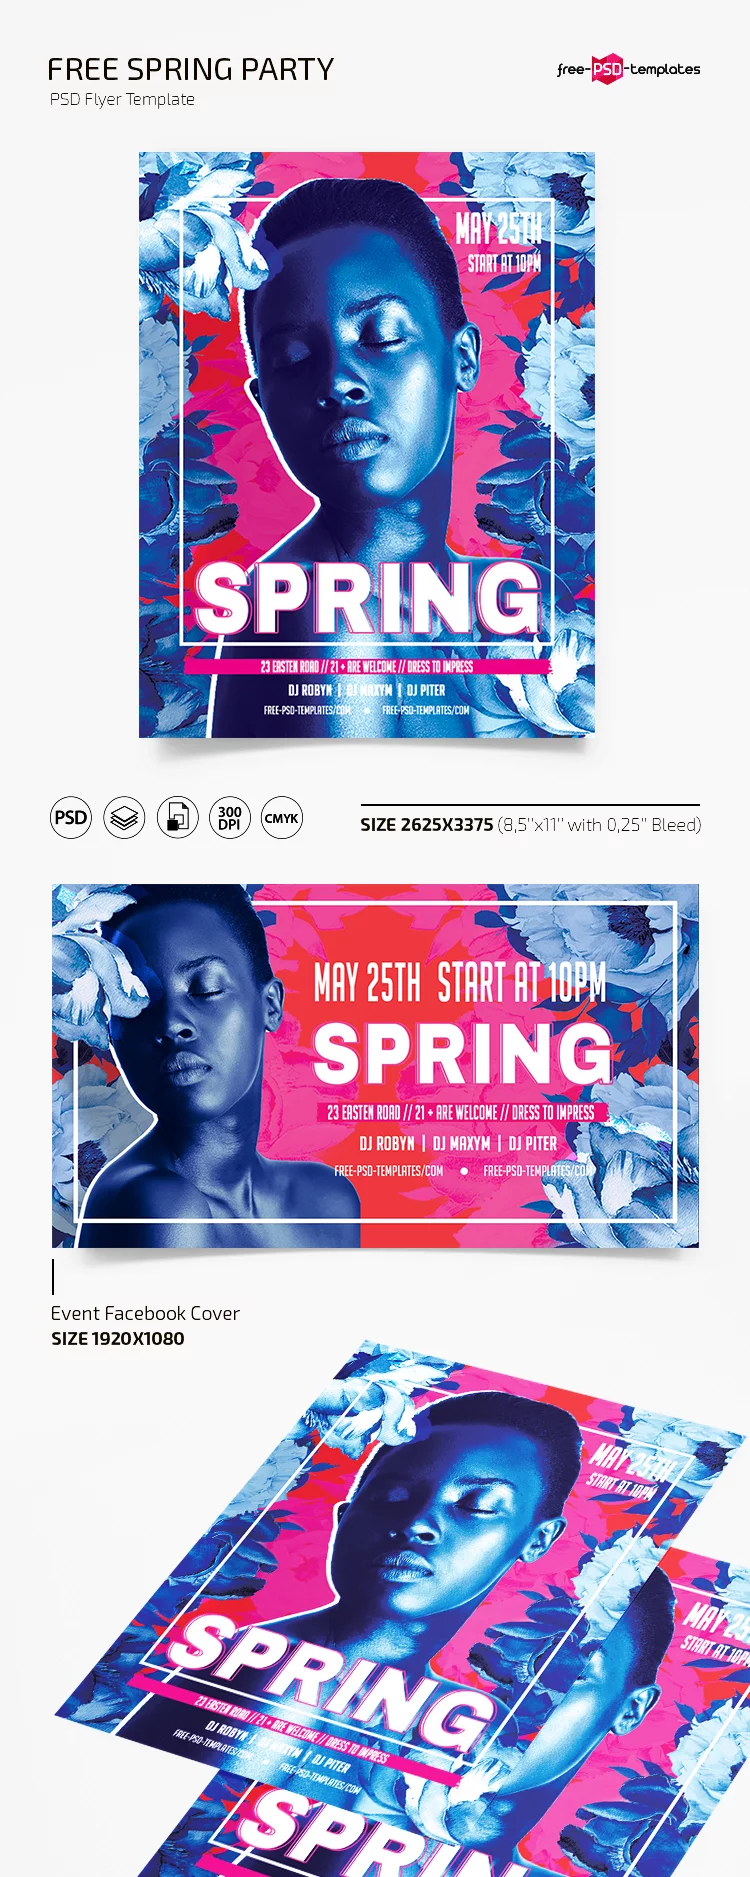 Free Spring Party Flyer Template in PSD